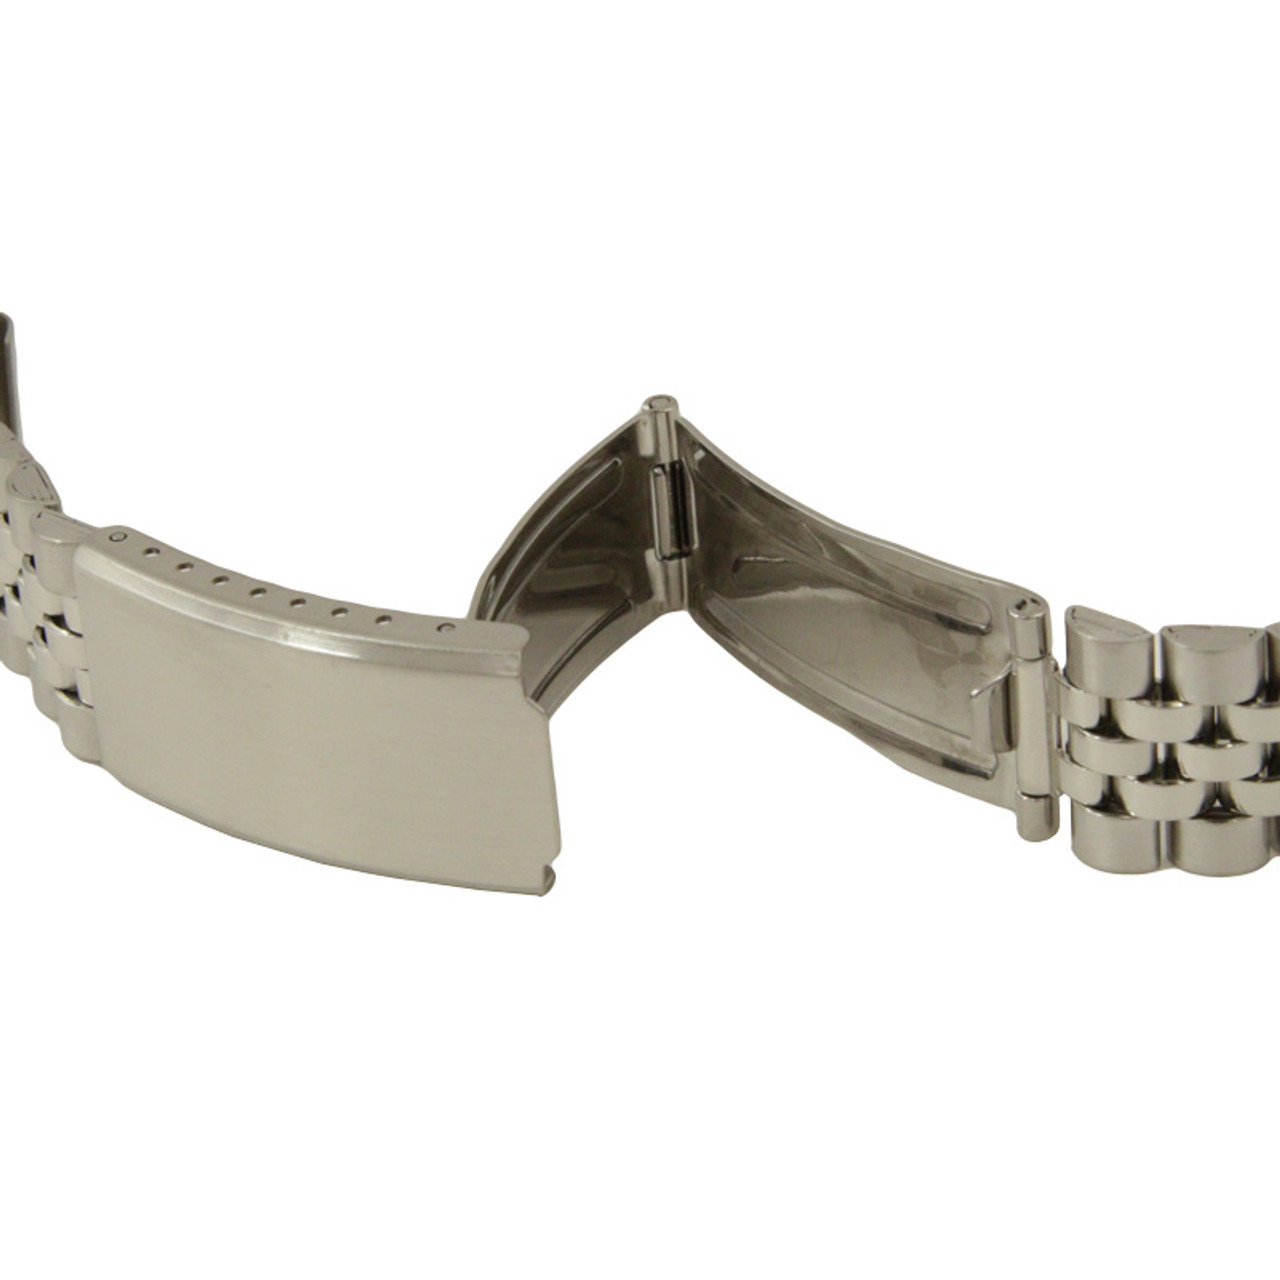 Hadley Roma Southwest Style Watch Band Expansion Extender Silver Tone Color  3 5/8 Inch Length